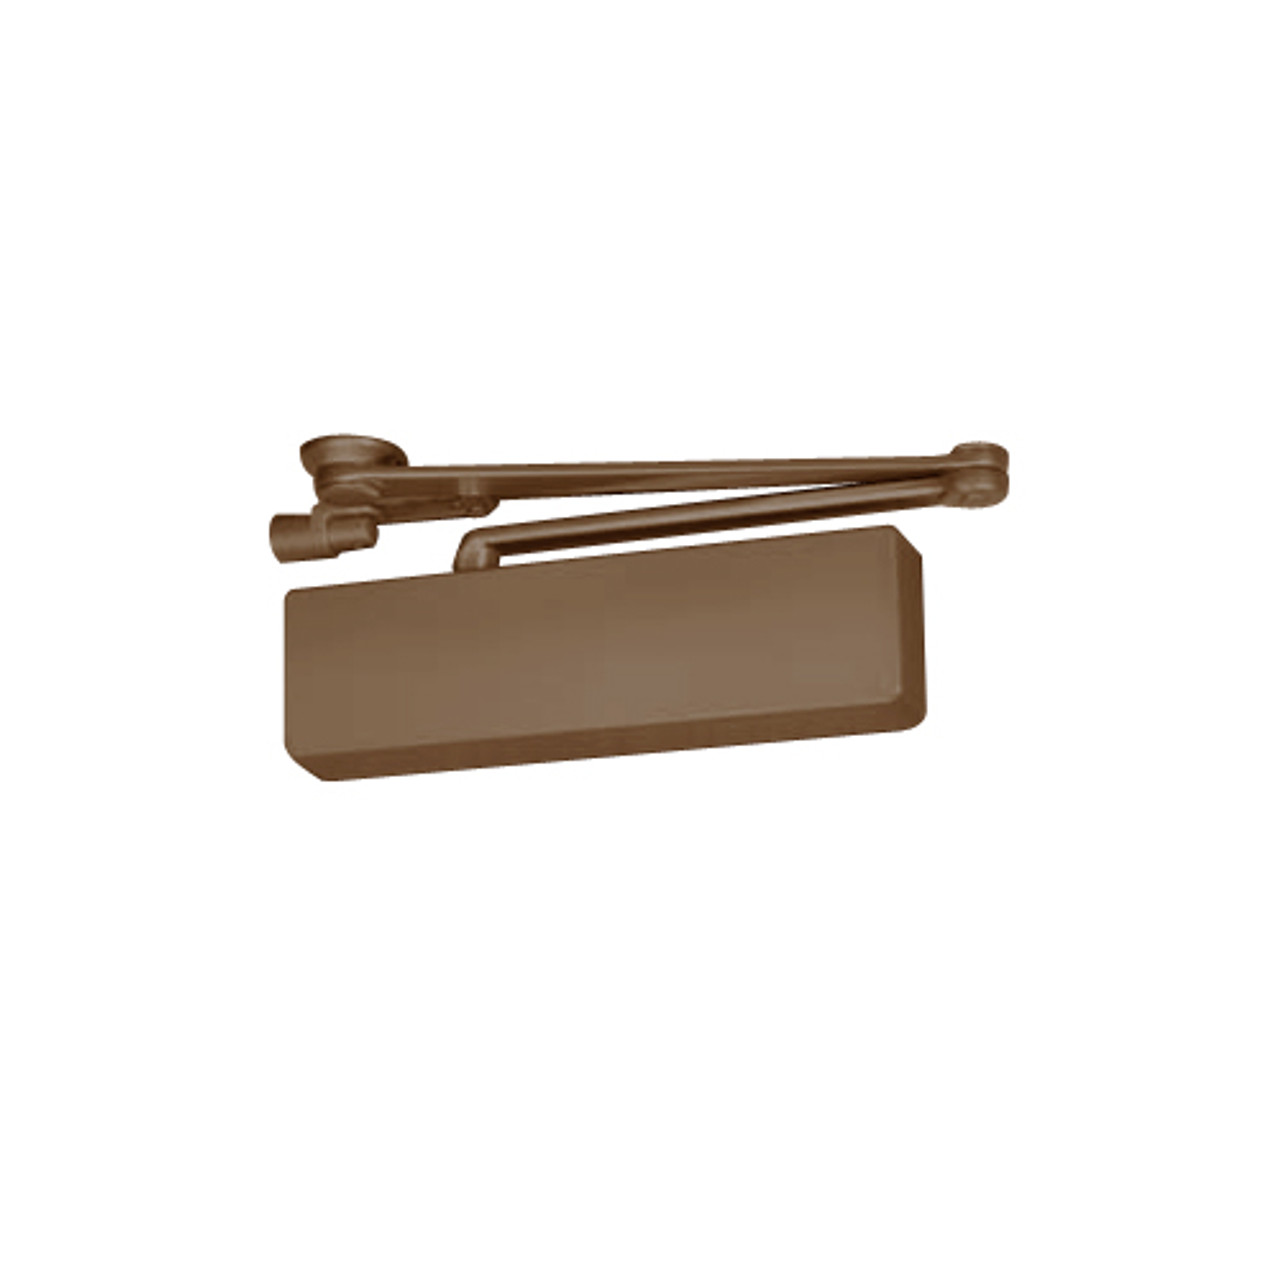 CPS7500M-691 Norton 7500 Series Non-Hold Open Institutional Door Closer with CloserPlus Spring Arm in Dull Bronze Finish